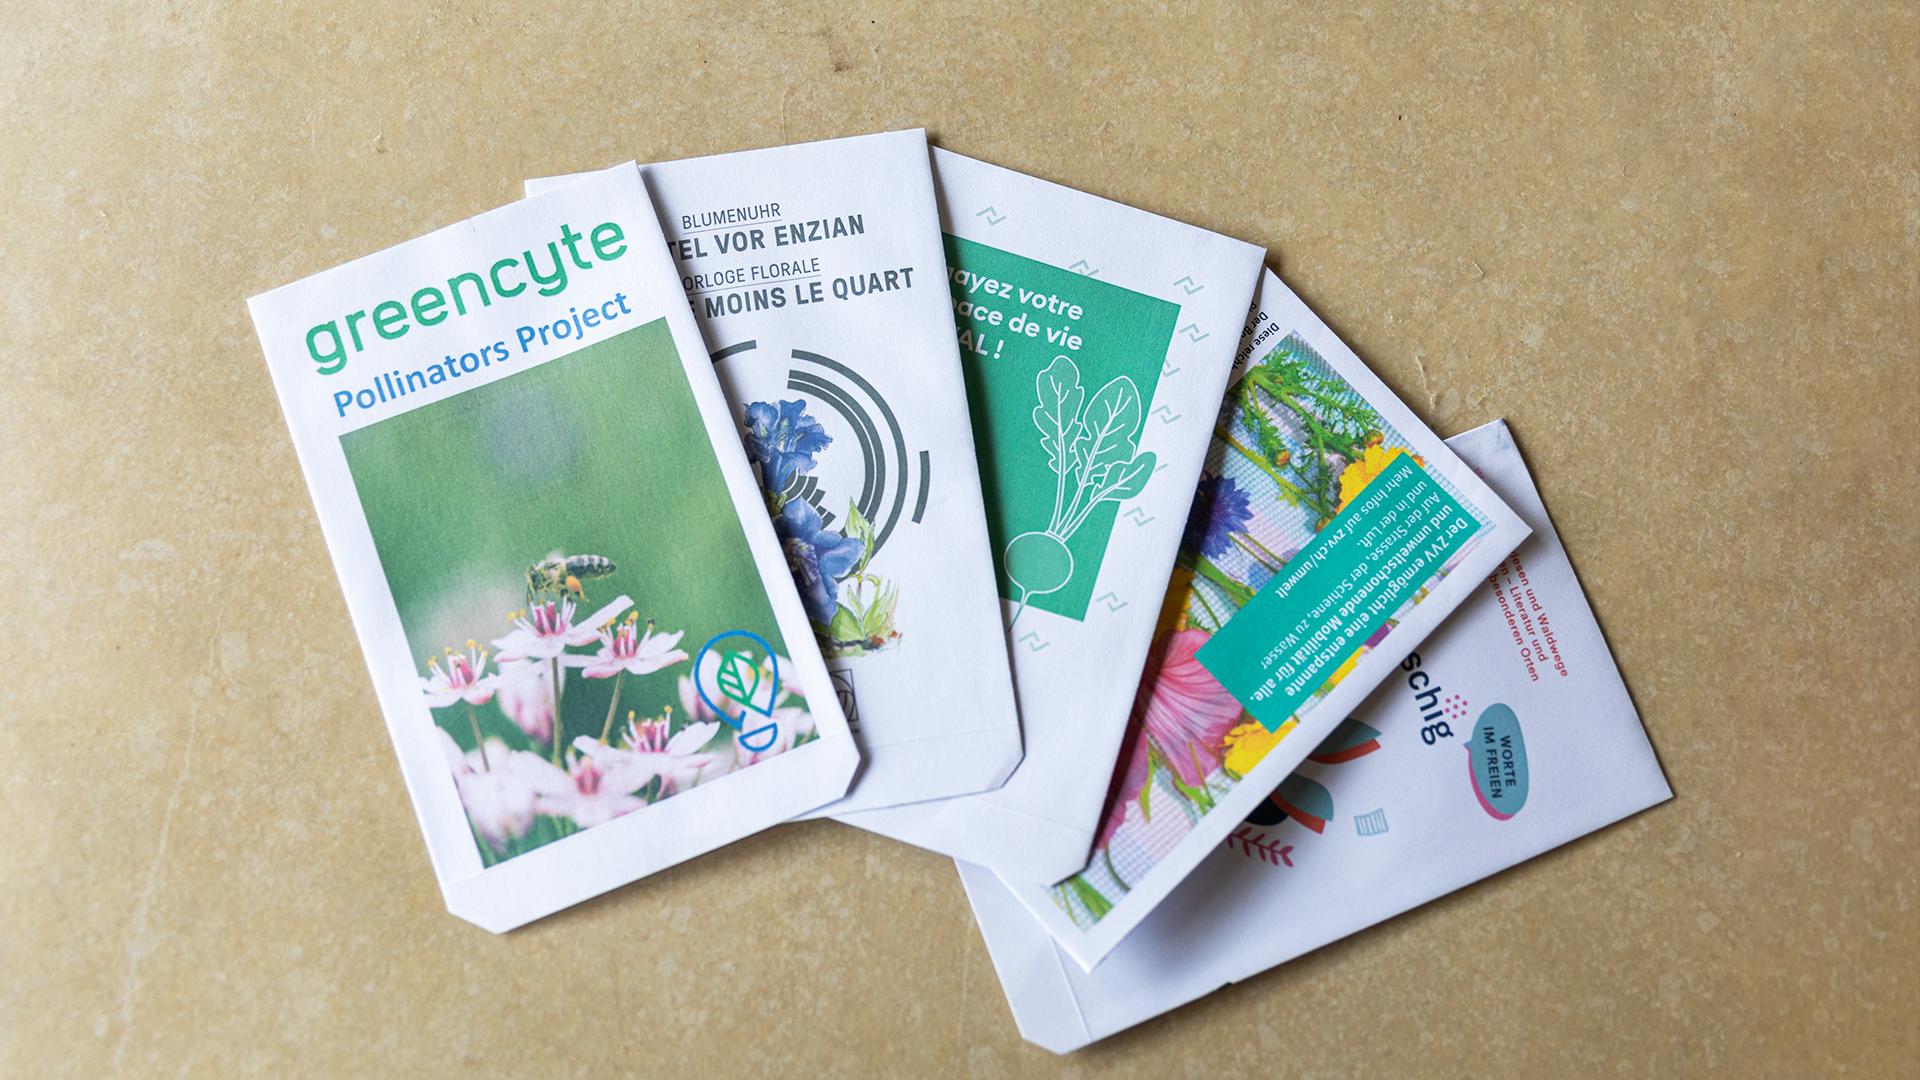 Personalized seed packets that can be used to advertise your comapany